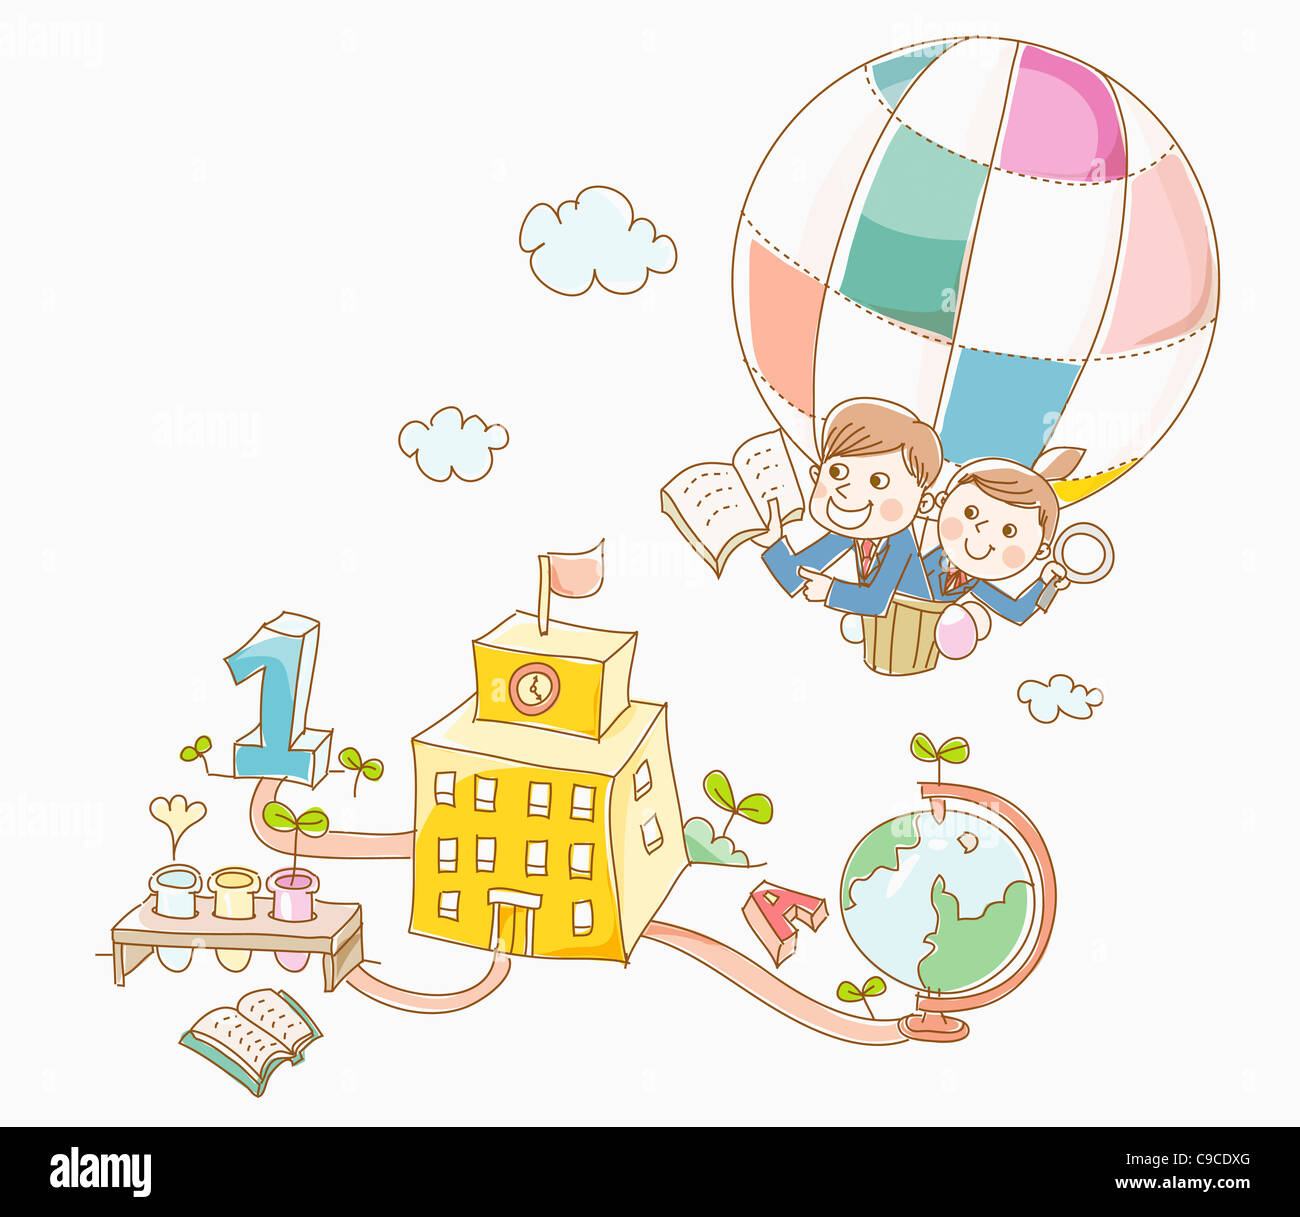 Boy and a girl in school uniform on hot air balloon Stock Photo